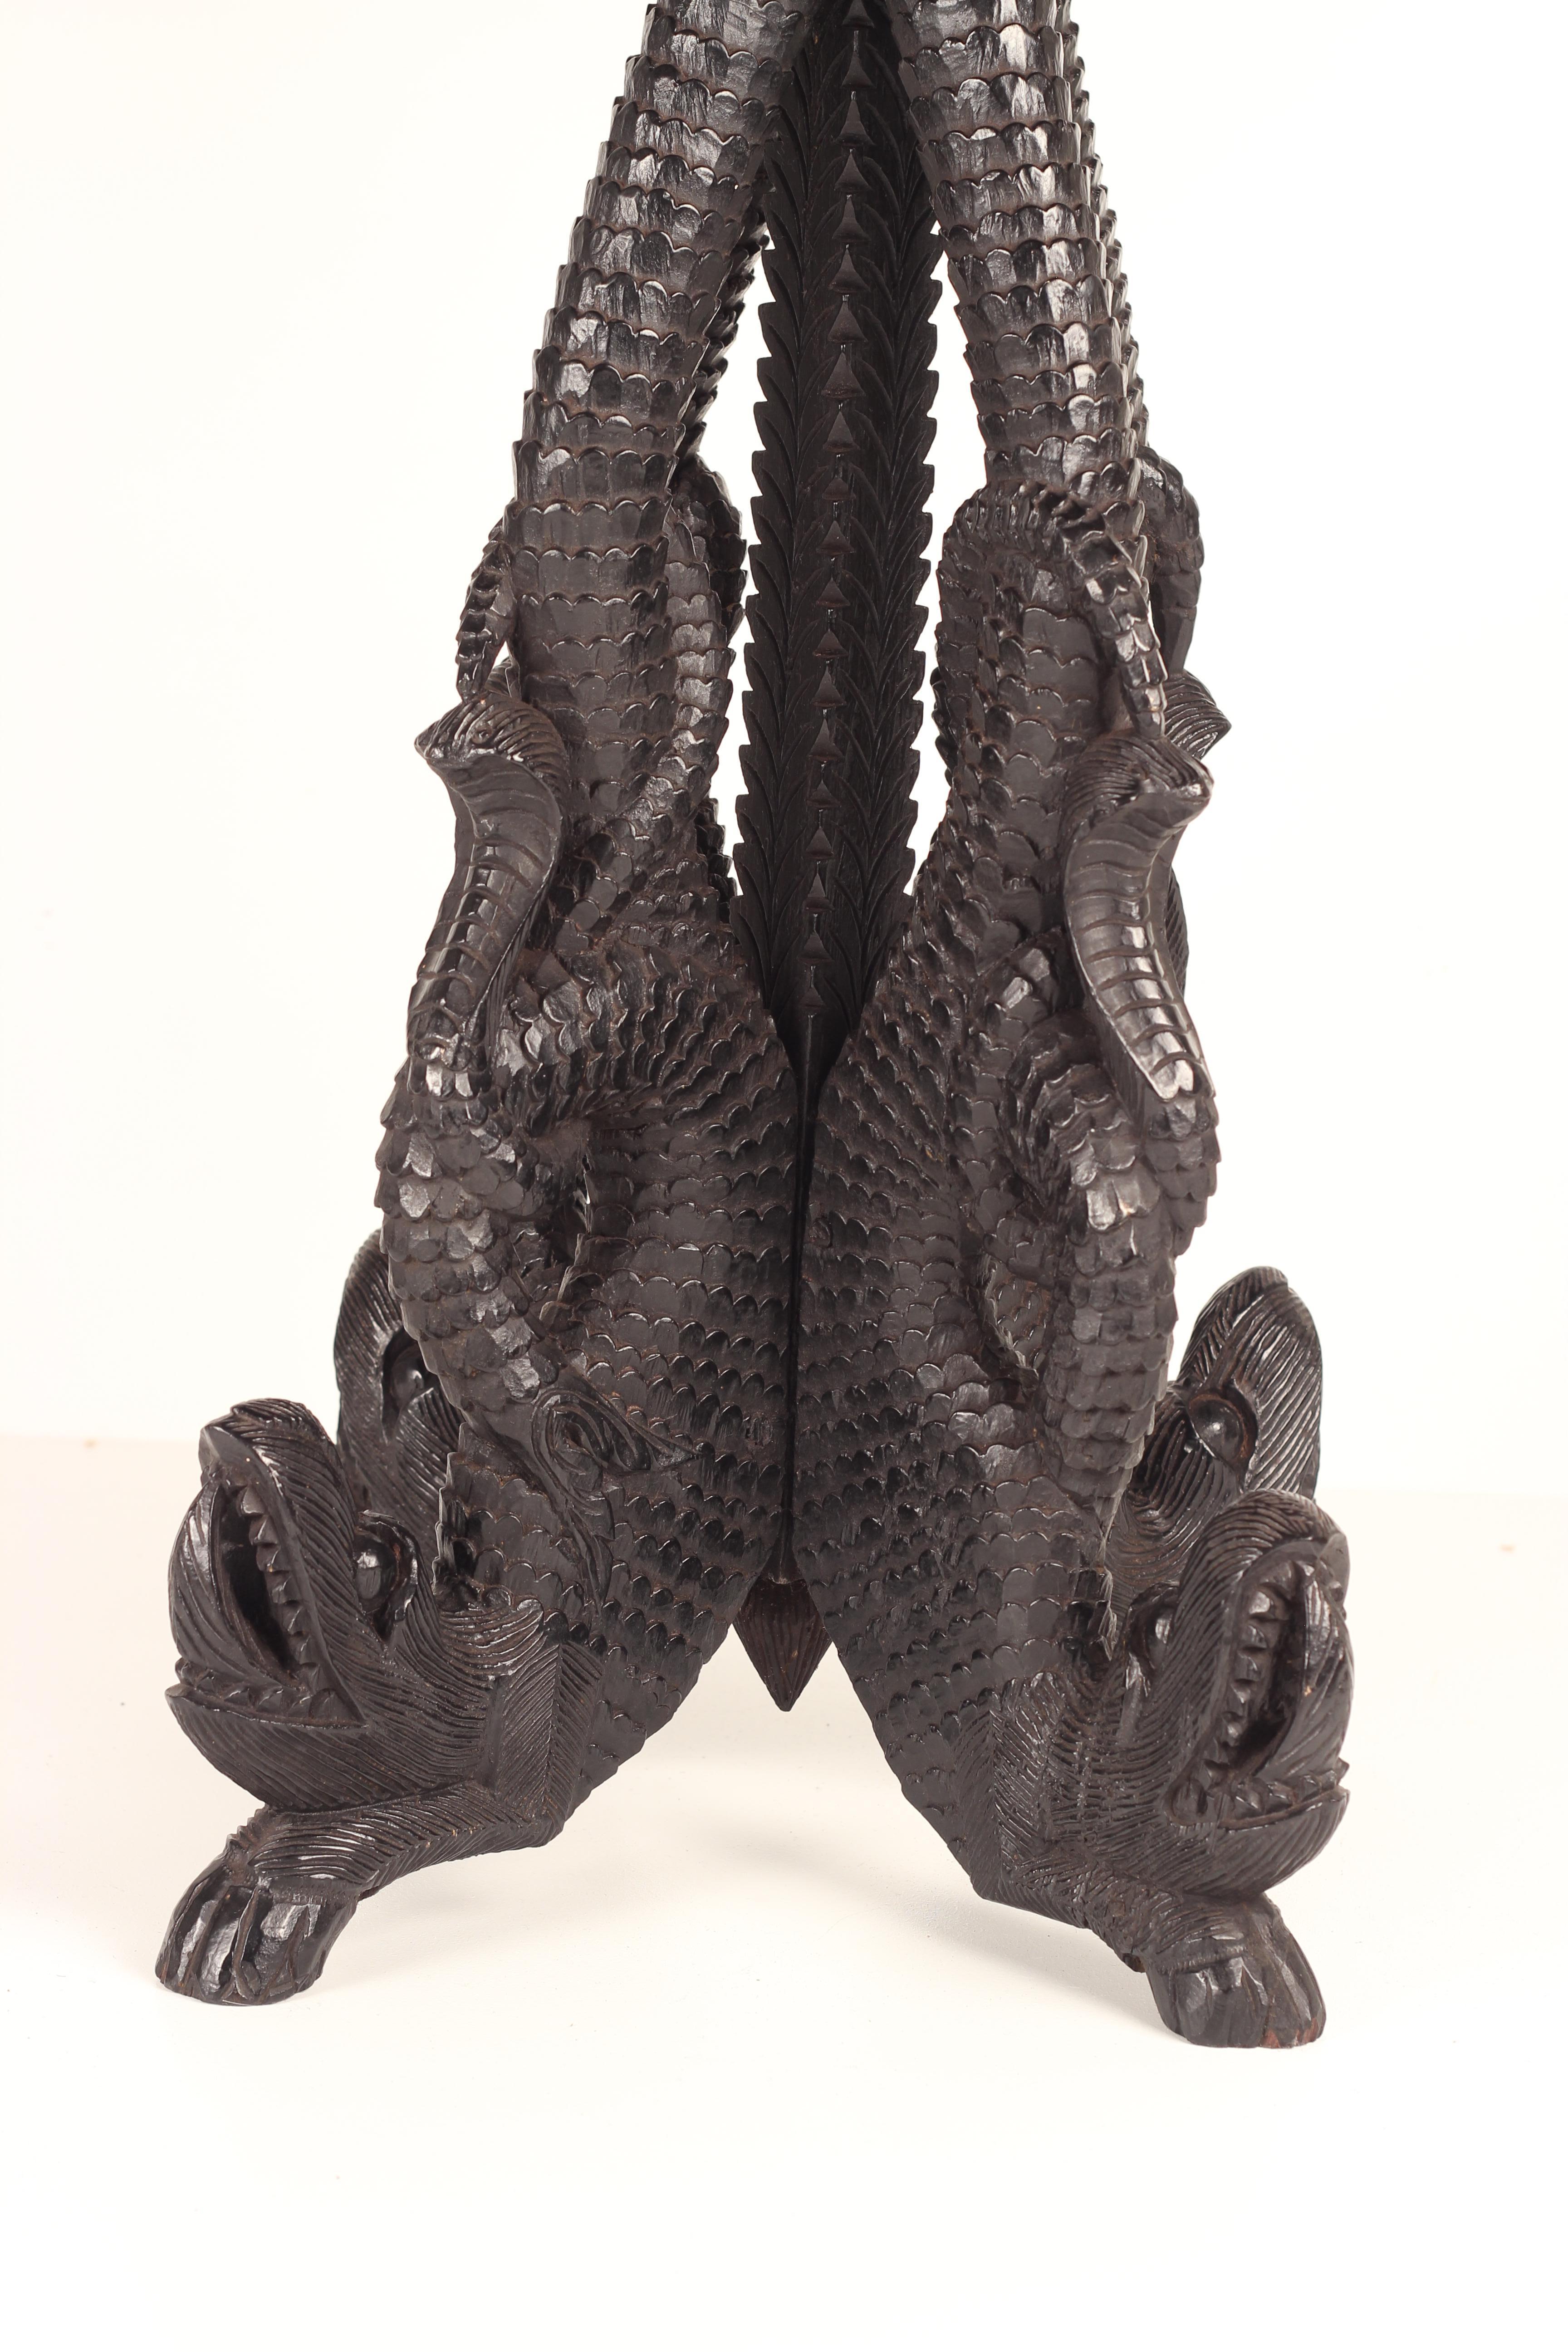 Boho Chic Style Anglo-Indian Carved Dragons Rosewood Centre Table, 19th Century For Sale 4